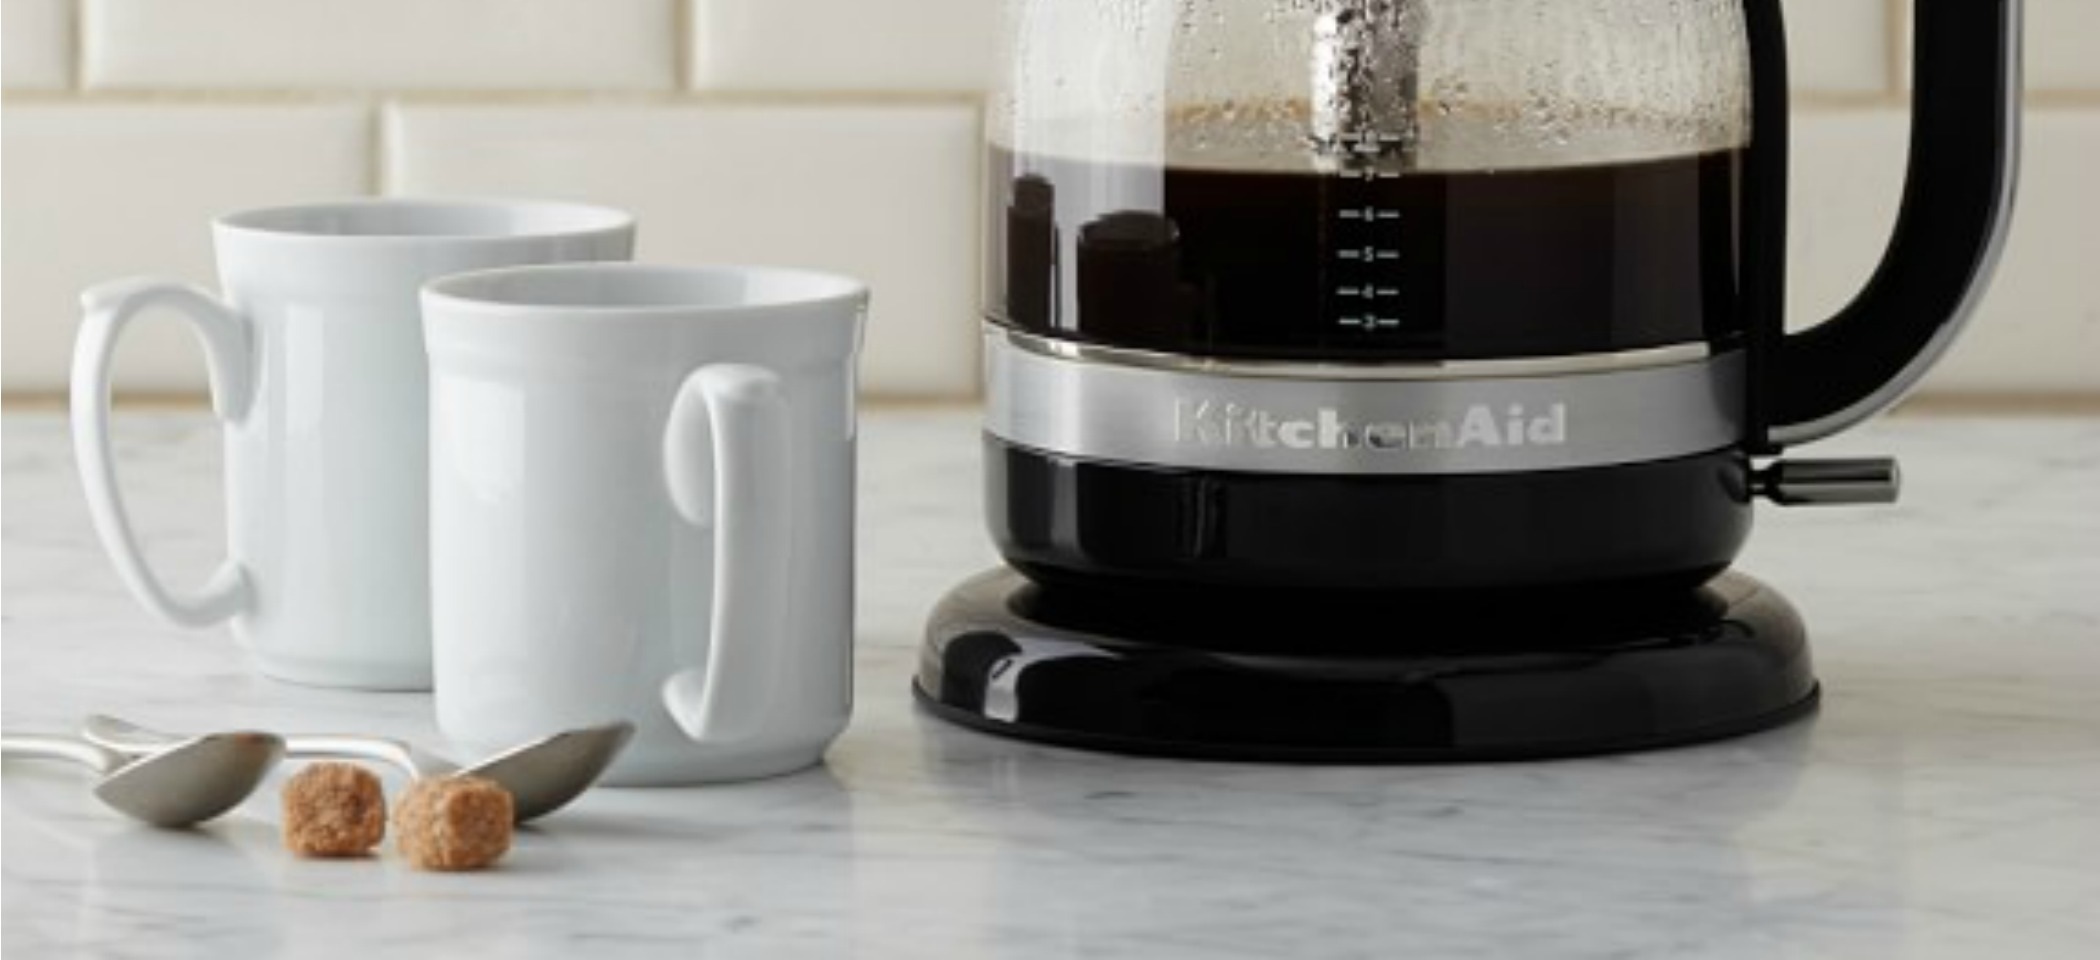 12 Products for the Perfect Cup of Coffee